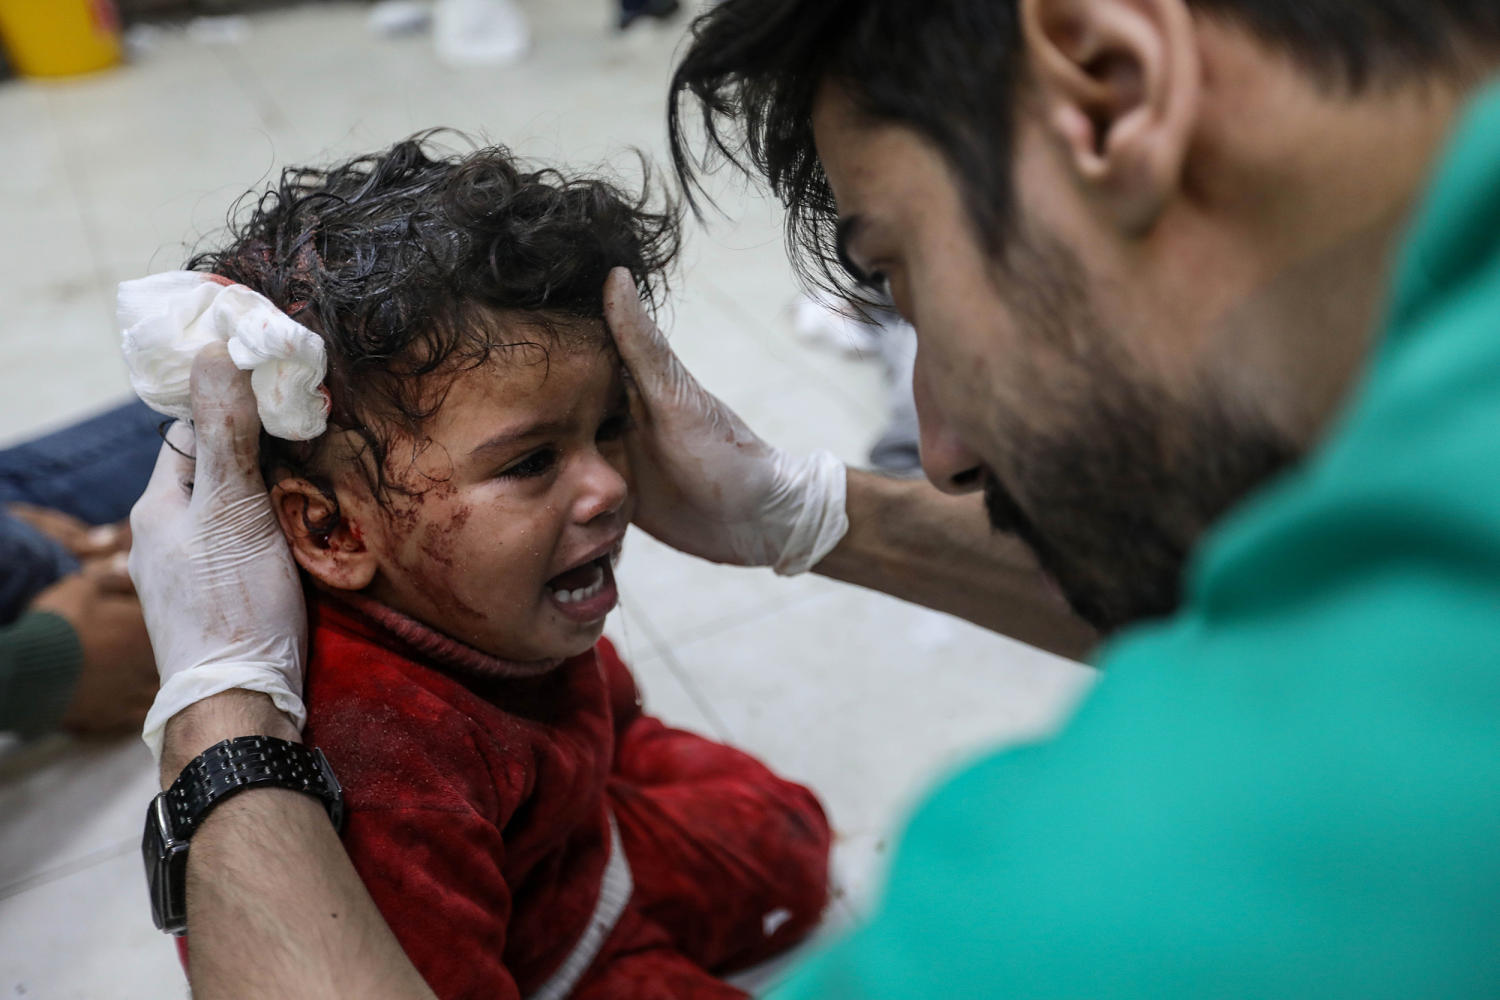 'Nowhere is safe': Doctors in Gaza describe the horror of caring for children affected by war